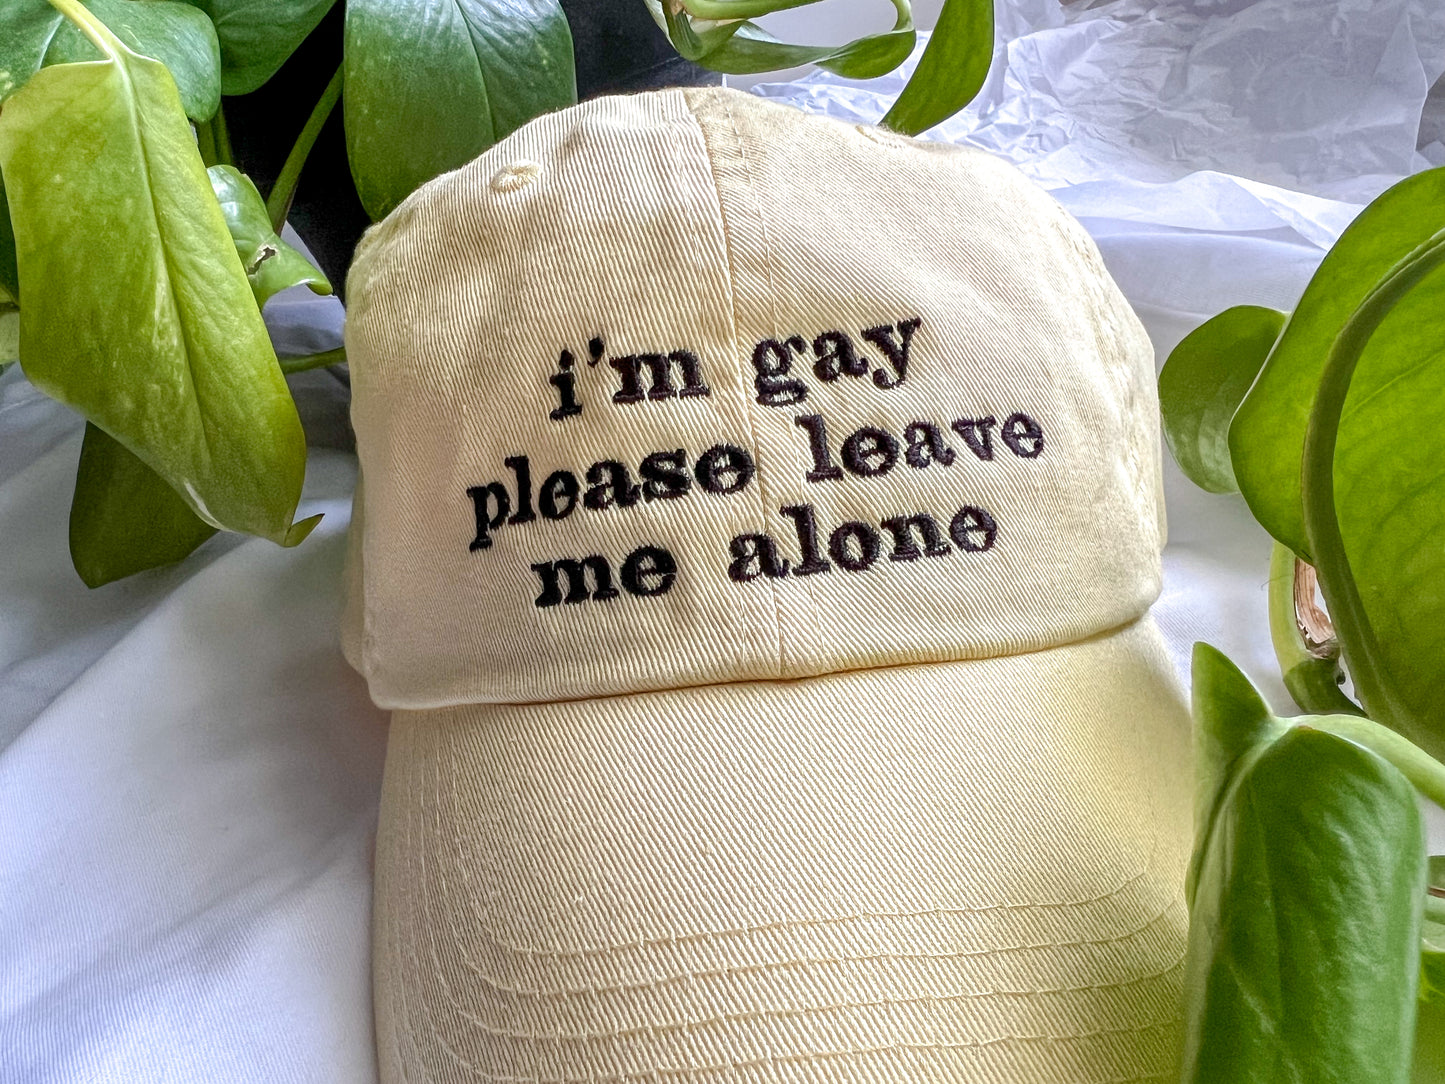 i'm gay please leave me alone cap (PREORDER)